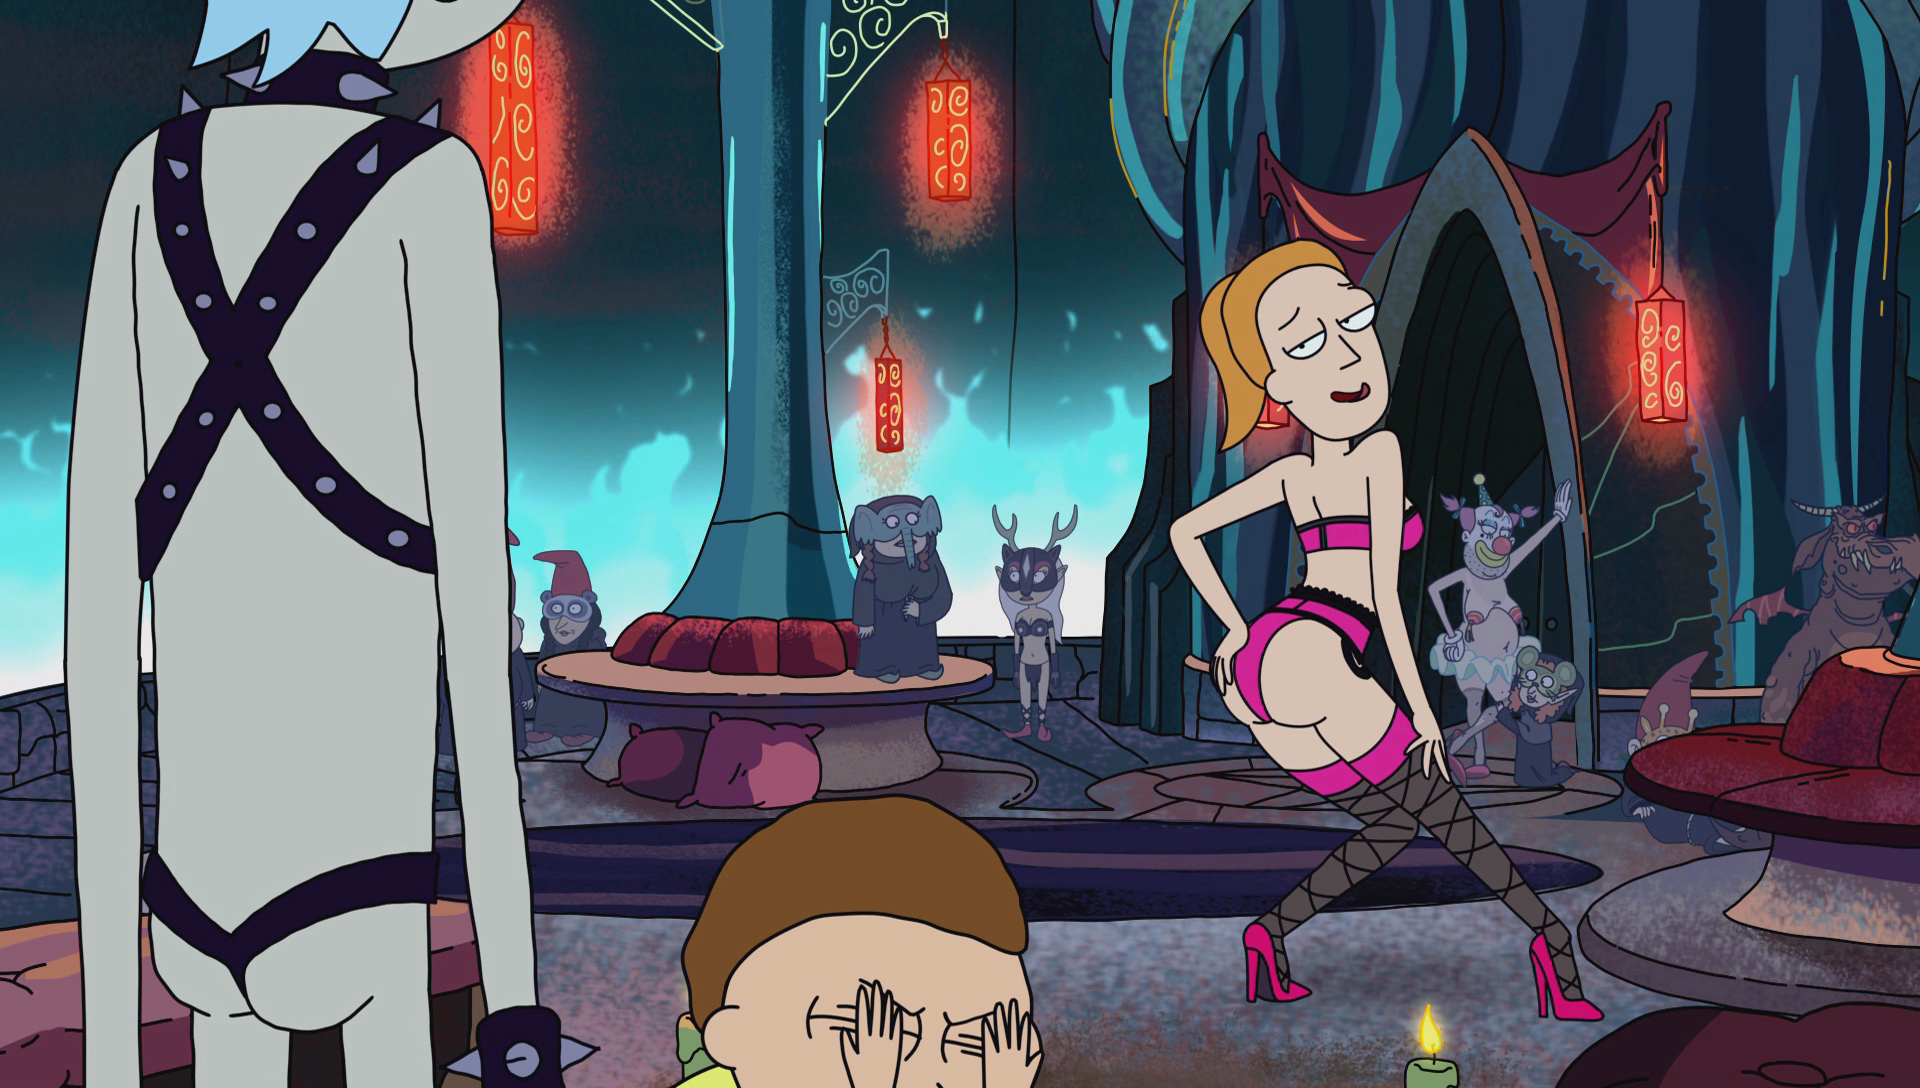 Image S1e2 Summer Pose Png Rick And Morty Wiki.